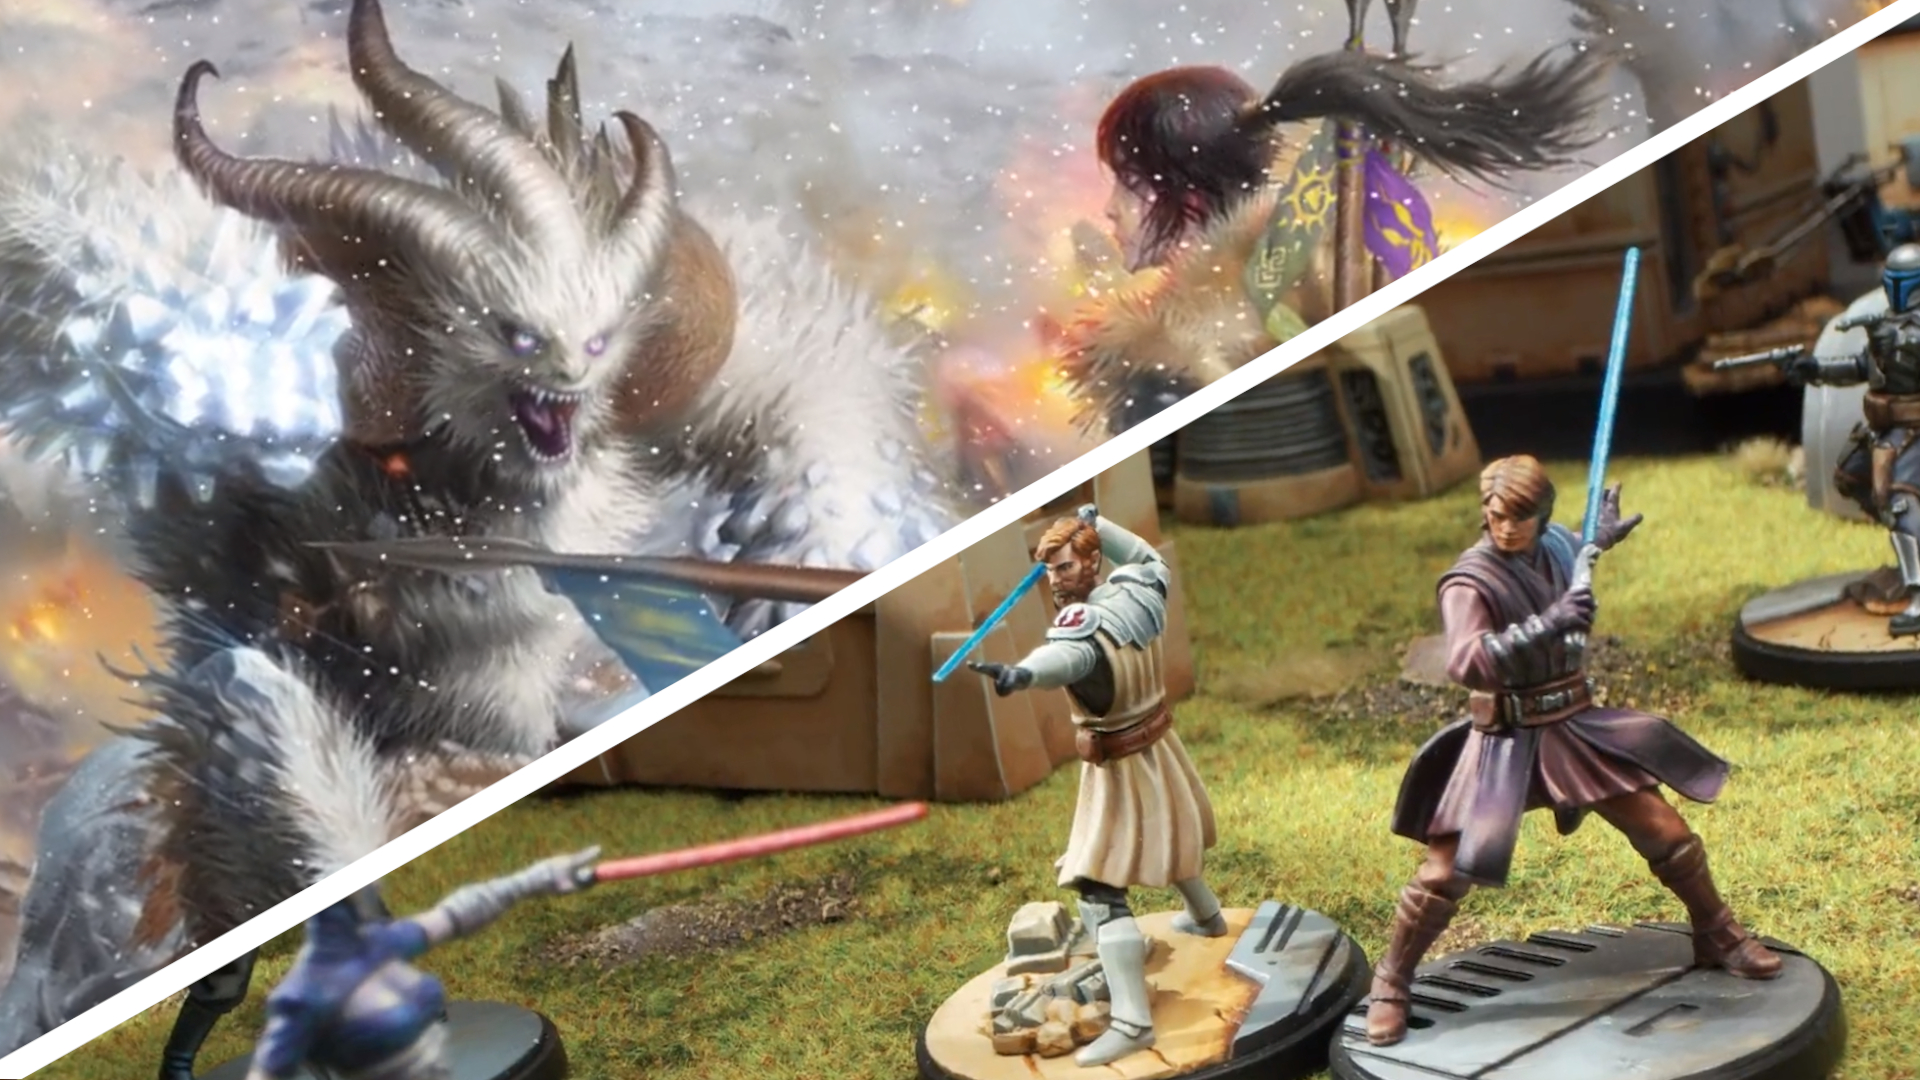 Rpg Role Playing Game Tabletop Board Games Stock Video - Video of strategy,  games: 127068221